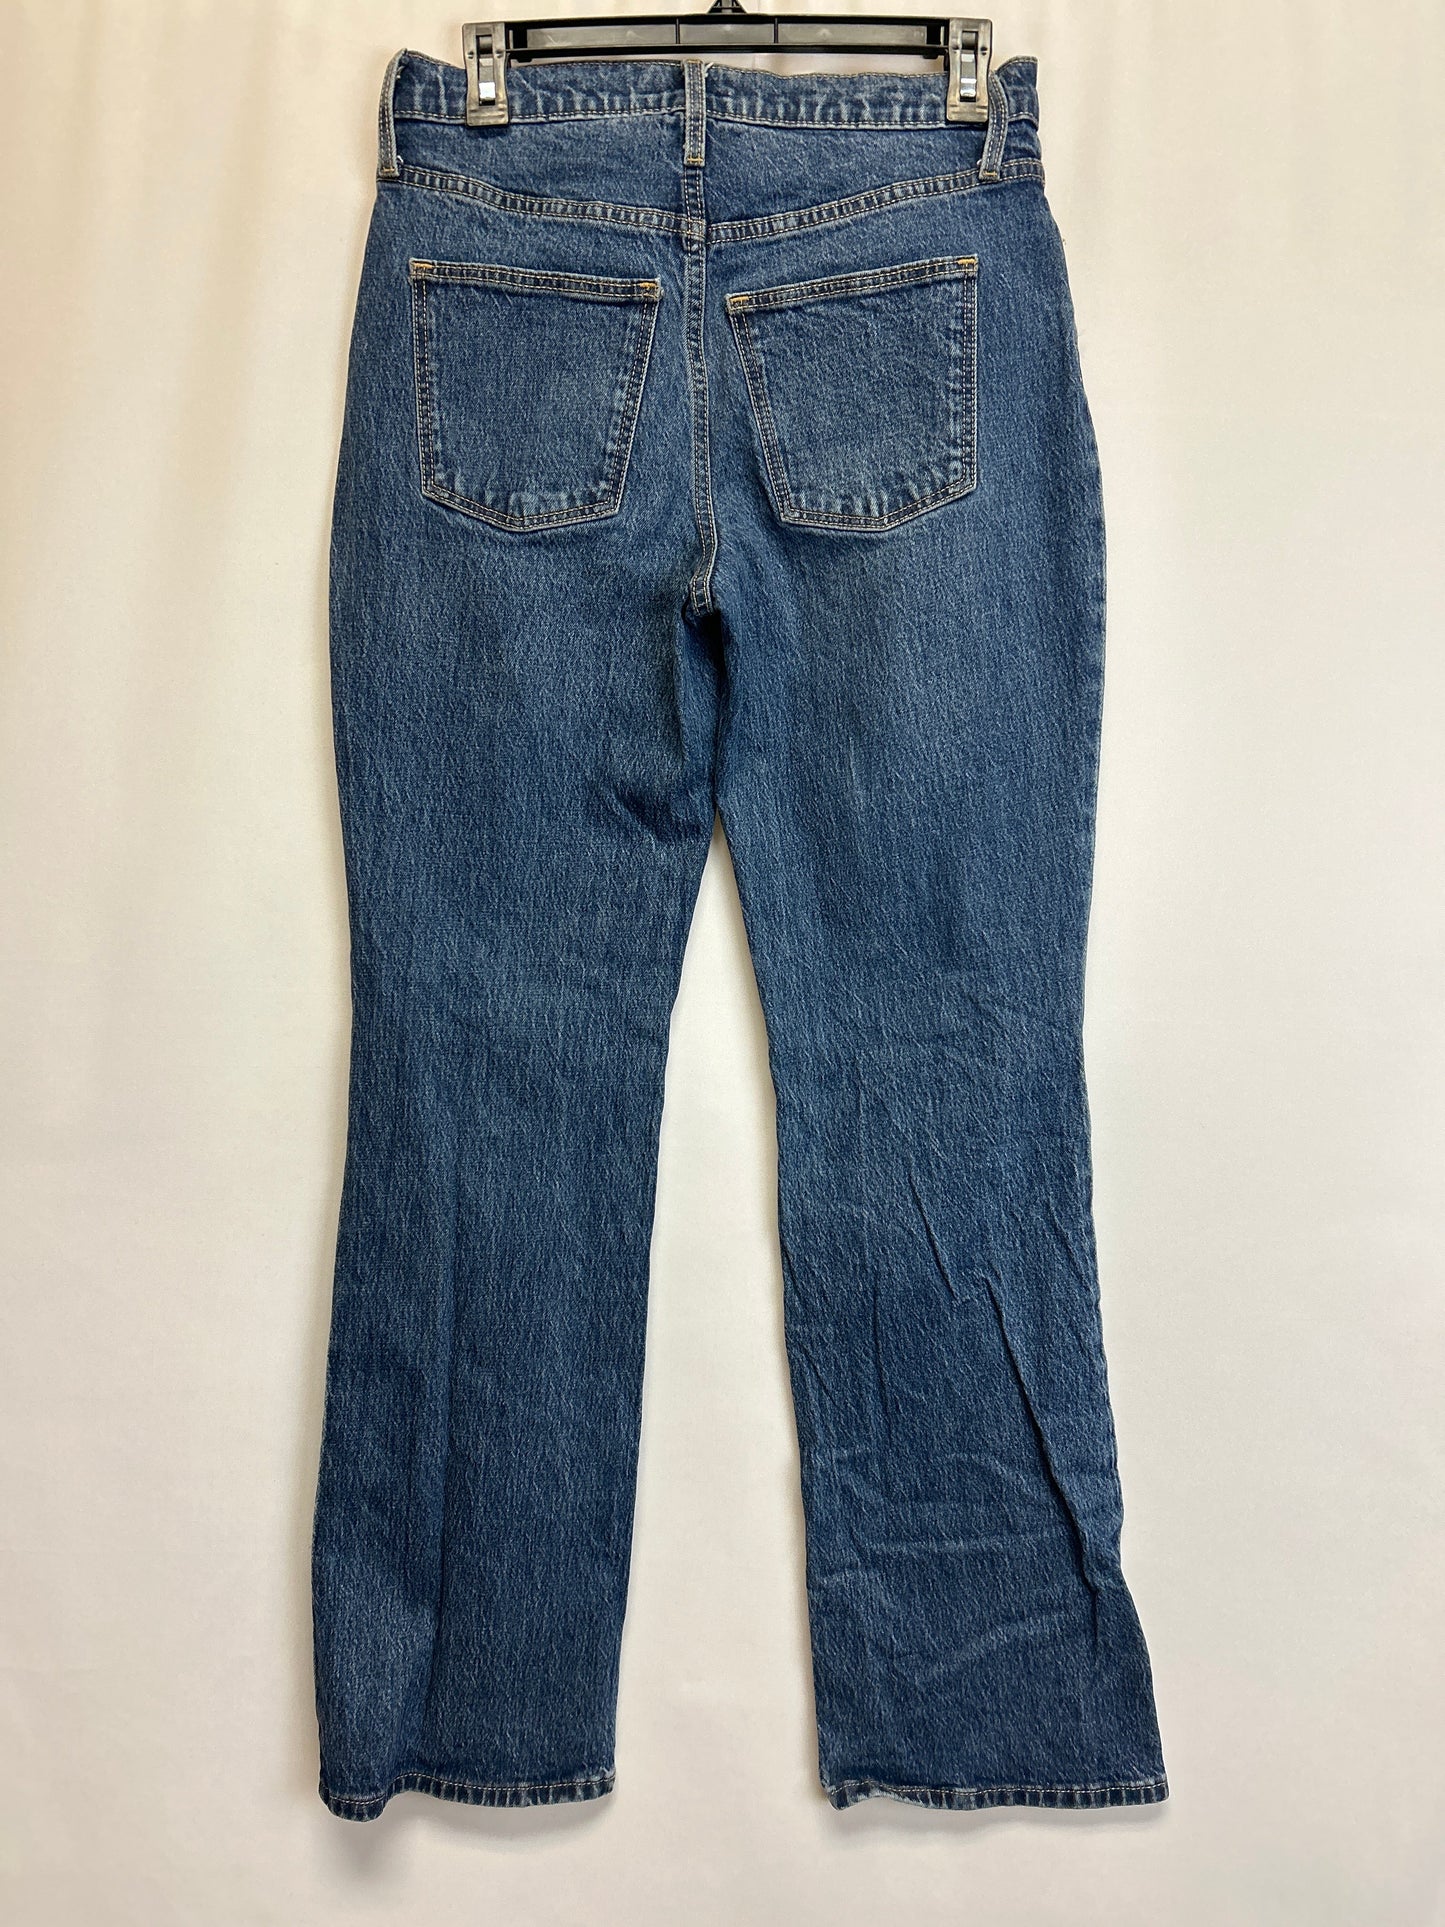 Jeans Boot Cut By Universal Thread  Size: 2